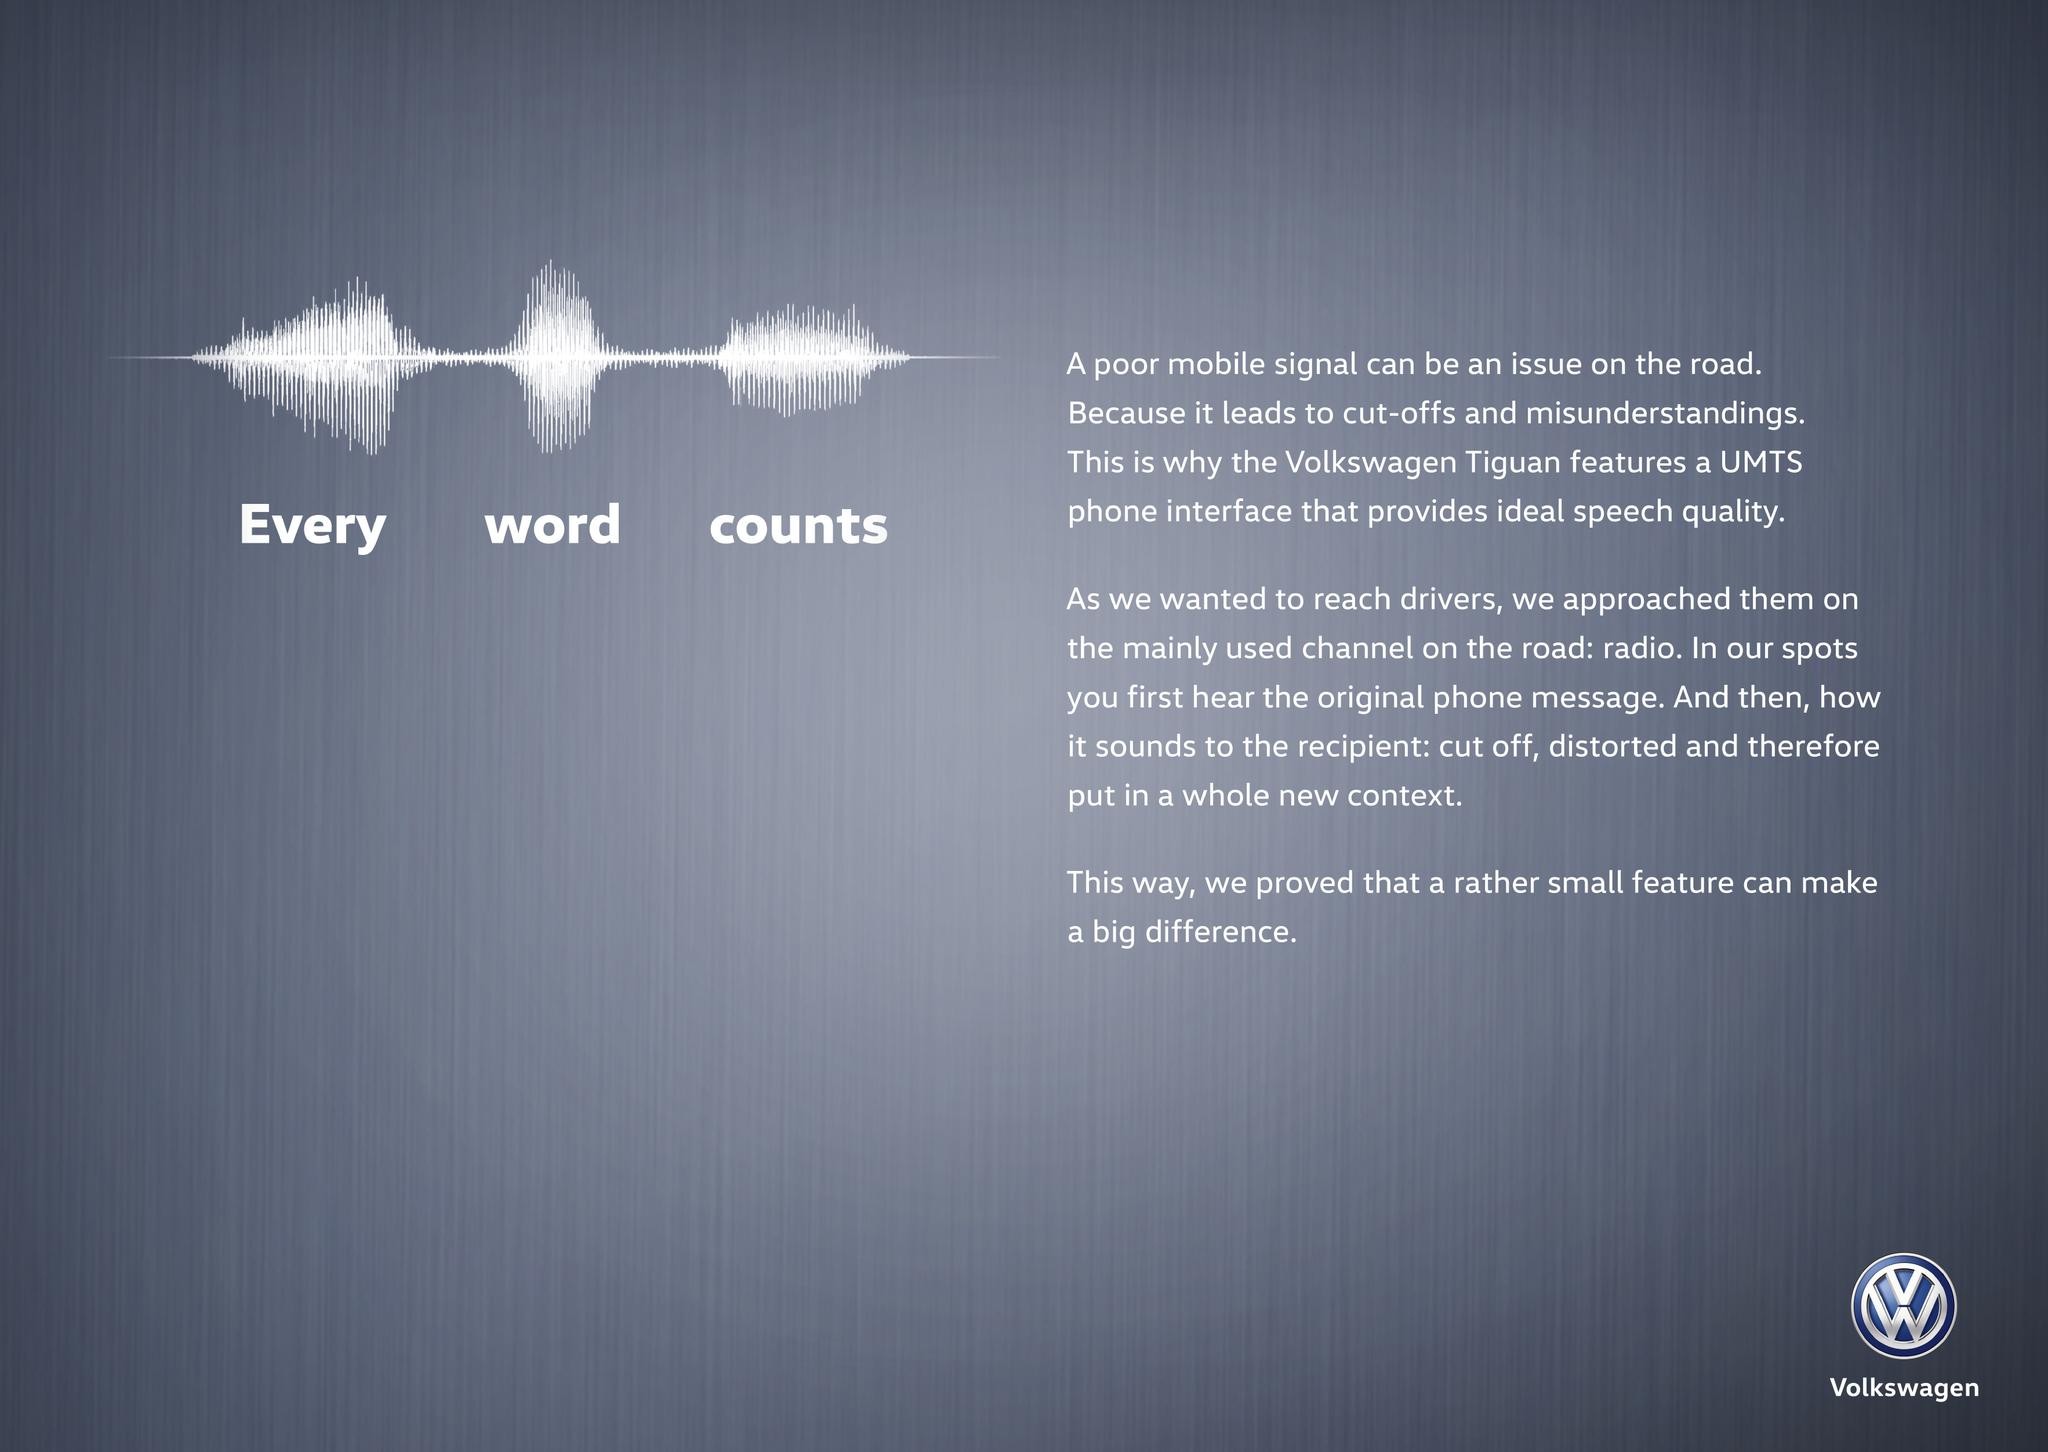 "Every word counts" 